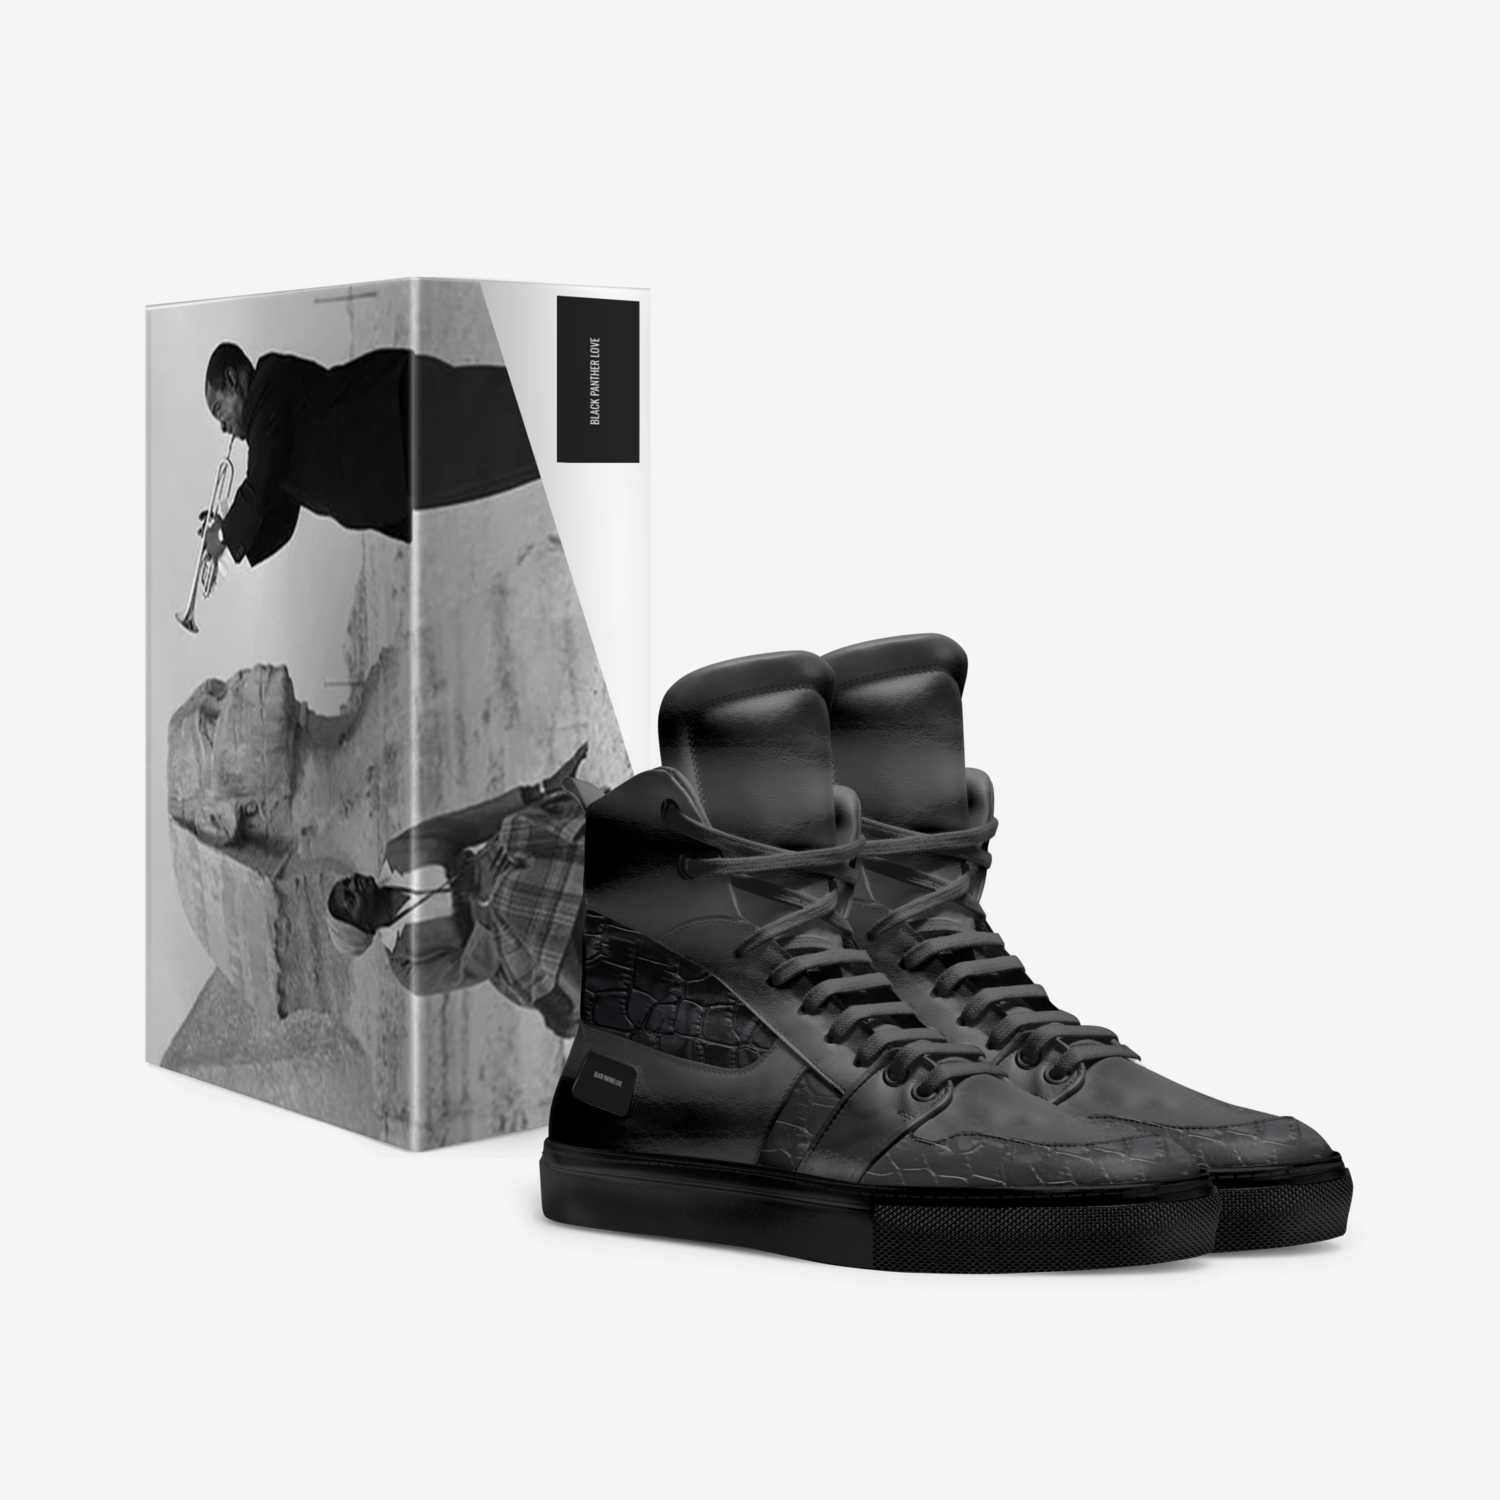 Black Panther Love custom made in Italy shoes by Mansa Ace^2 | Box view